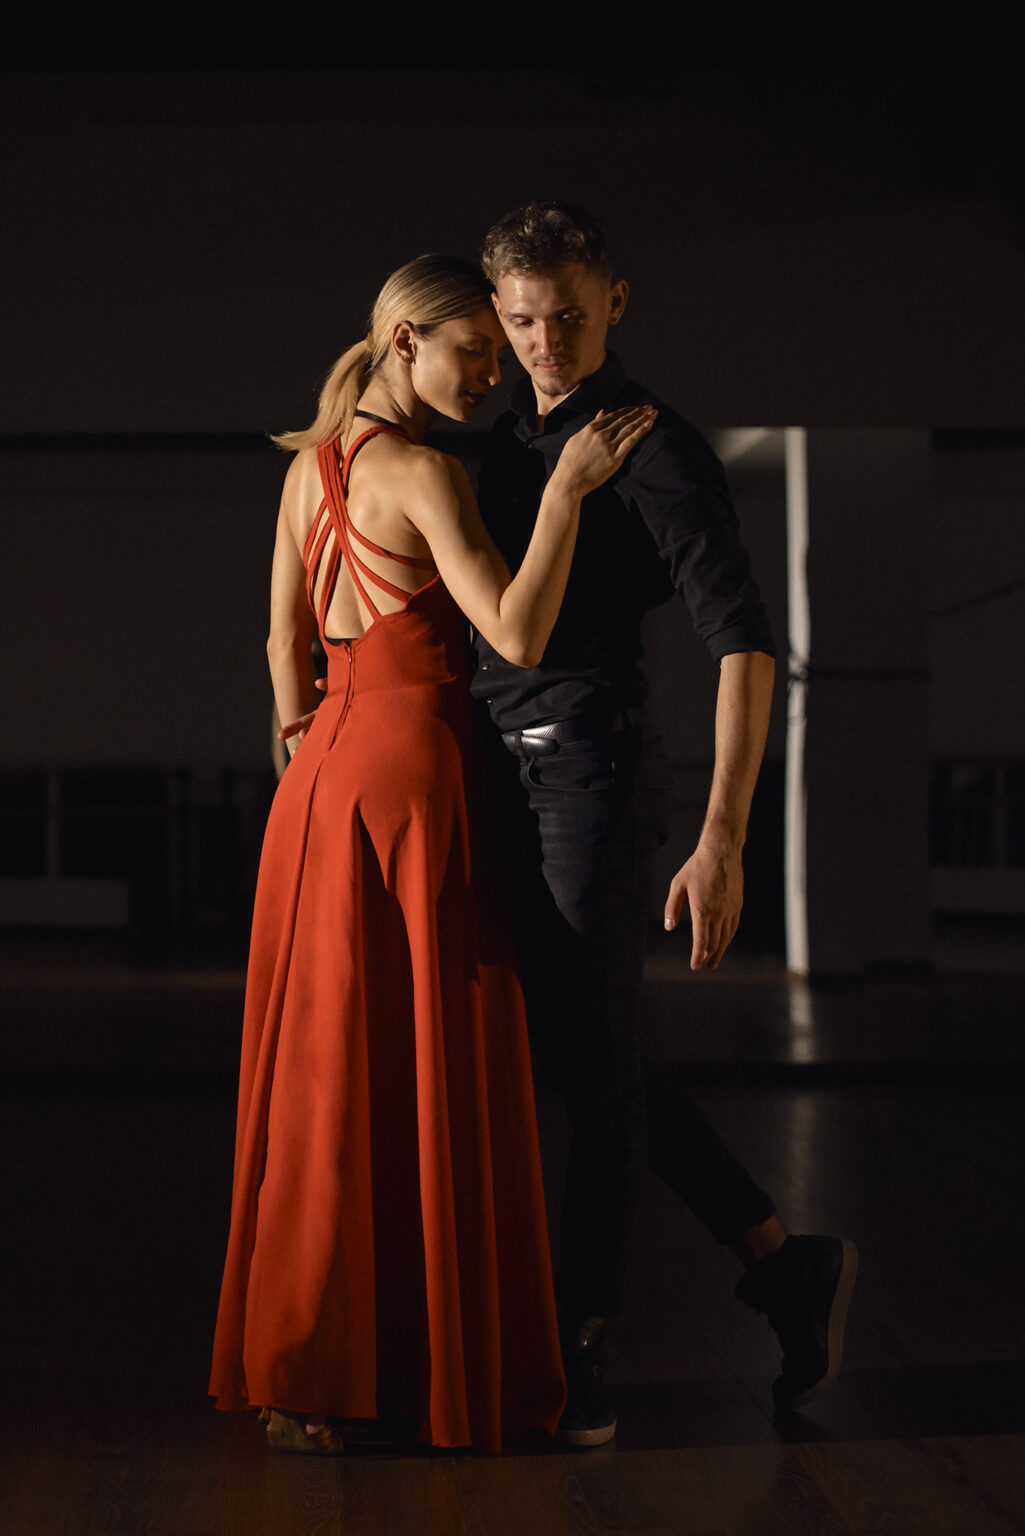 Young beautiful couple dancing with passion